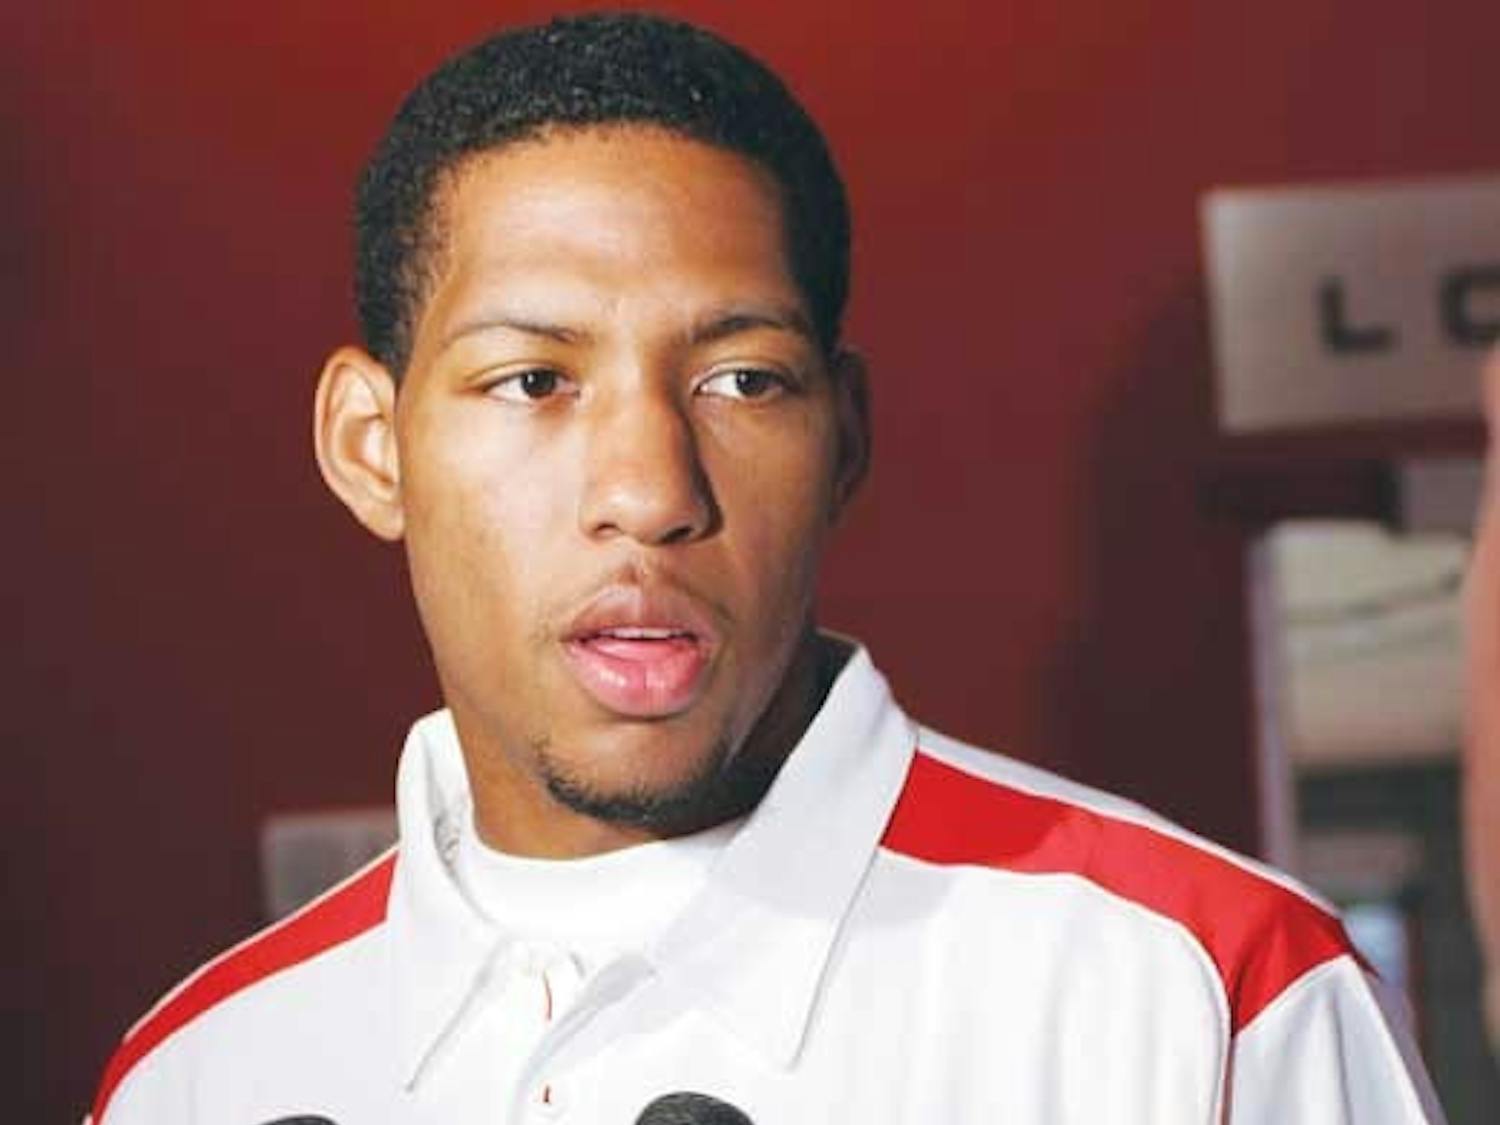 Danny Granger speaks during a press conference at the Davalos Center on Wednesday. Granger is making a $500,000 donation to the UNM athletics program.